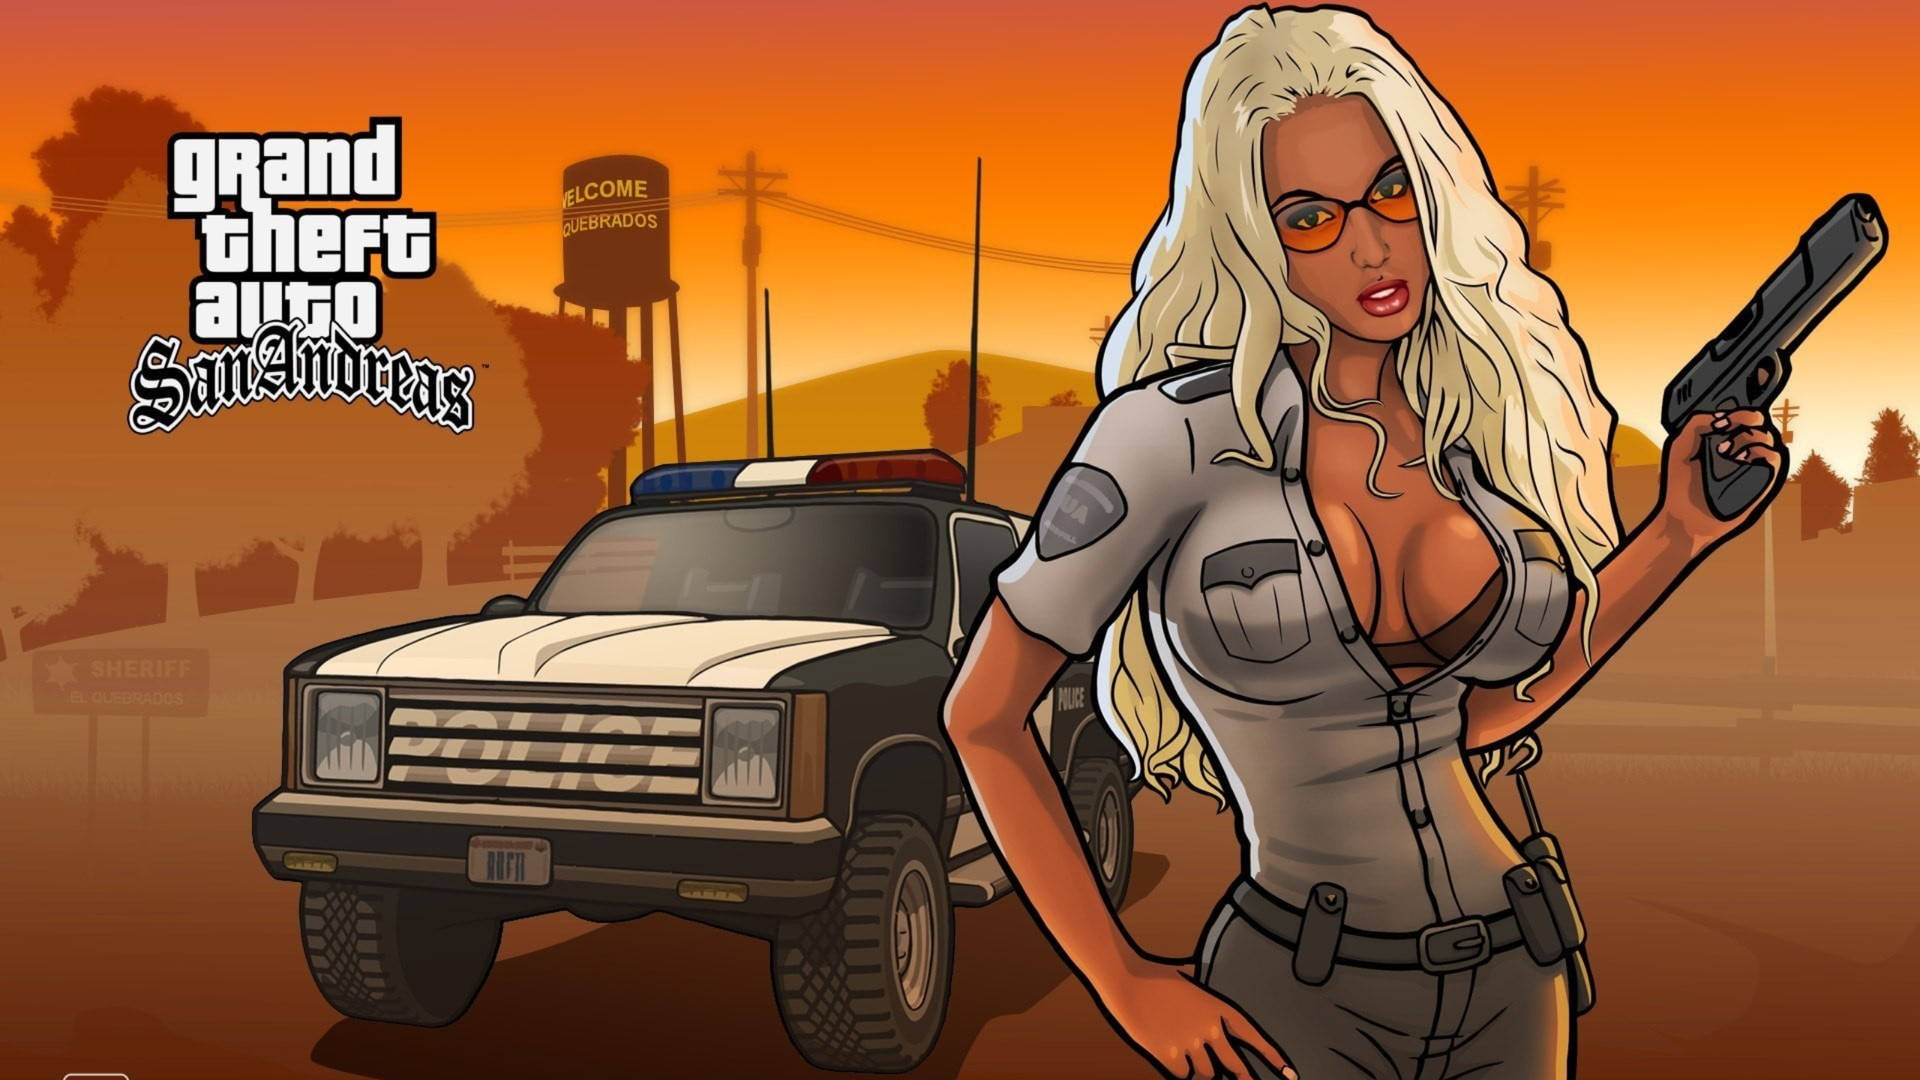 Grand Theft Auto Police Woman Background